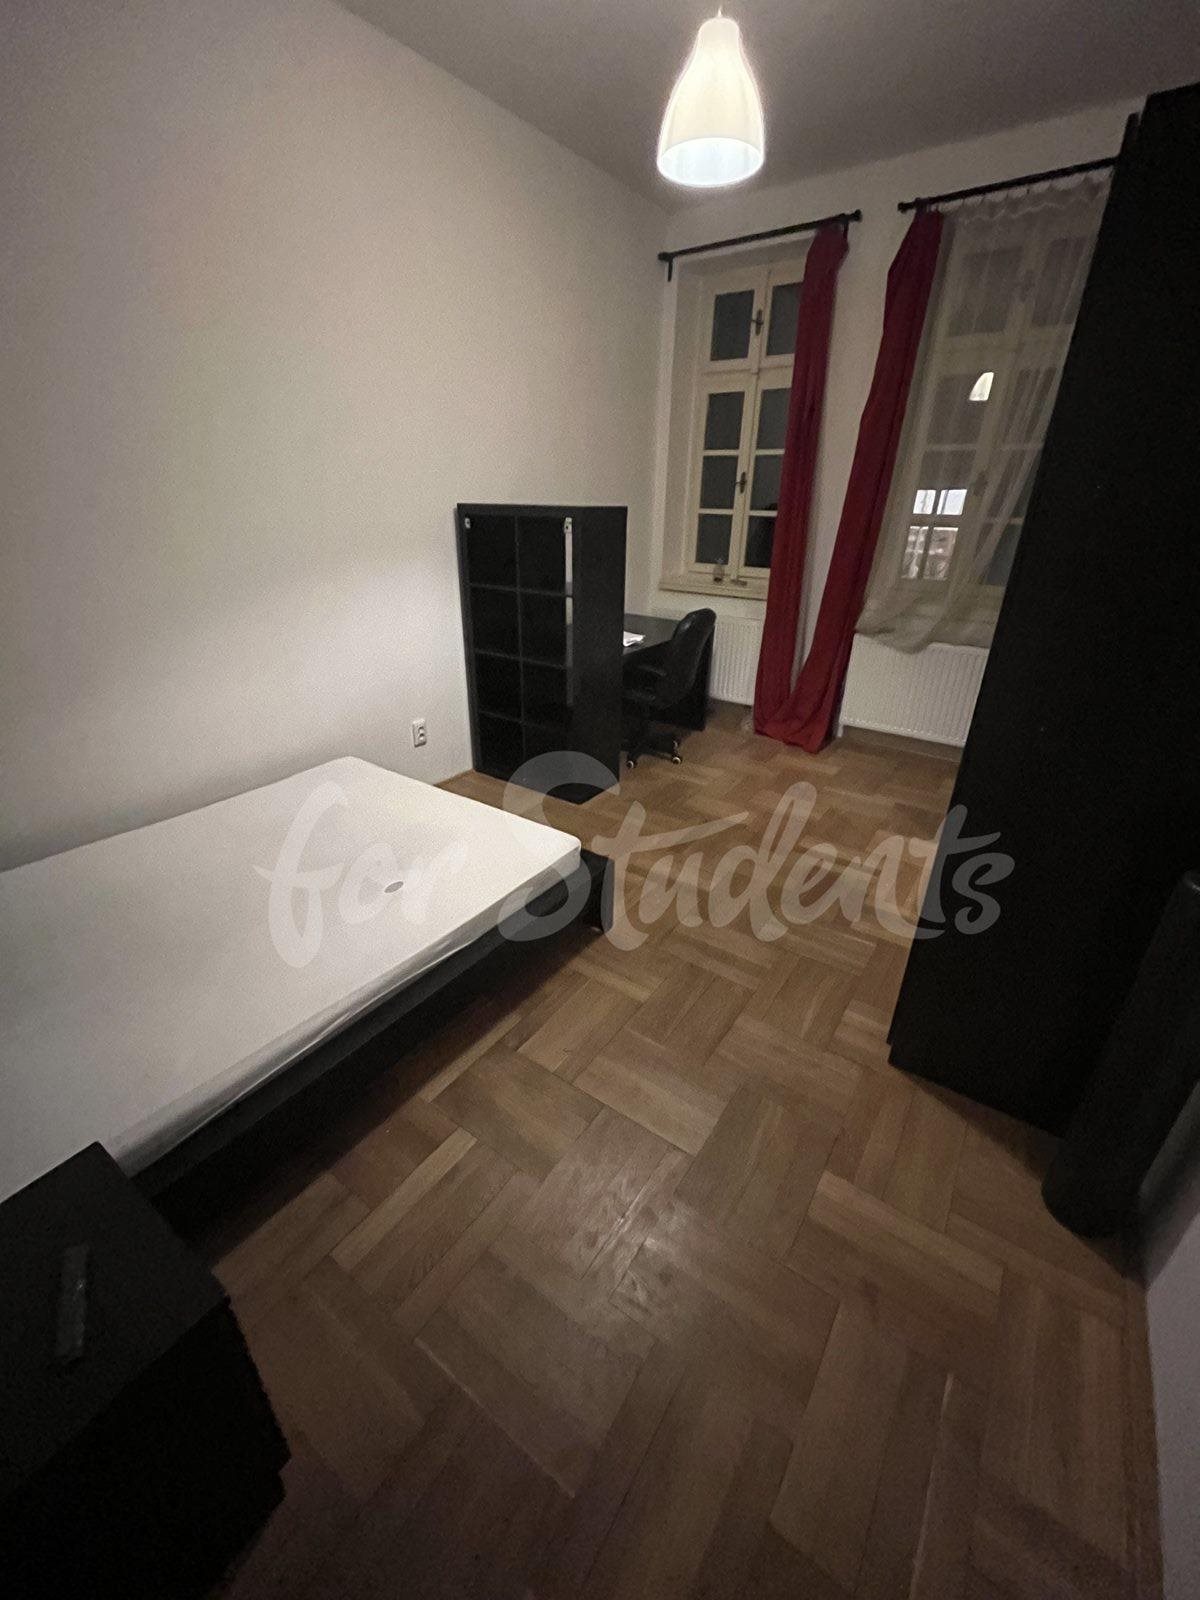 One bigger room in modern male three bedroom apartment in the Old Town, Hradec Králové